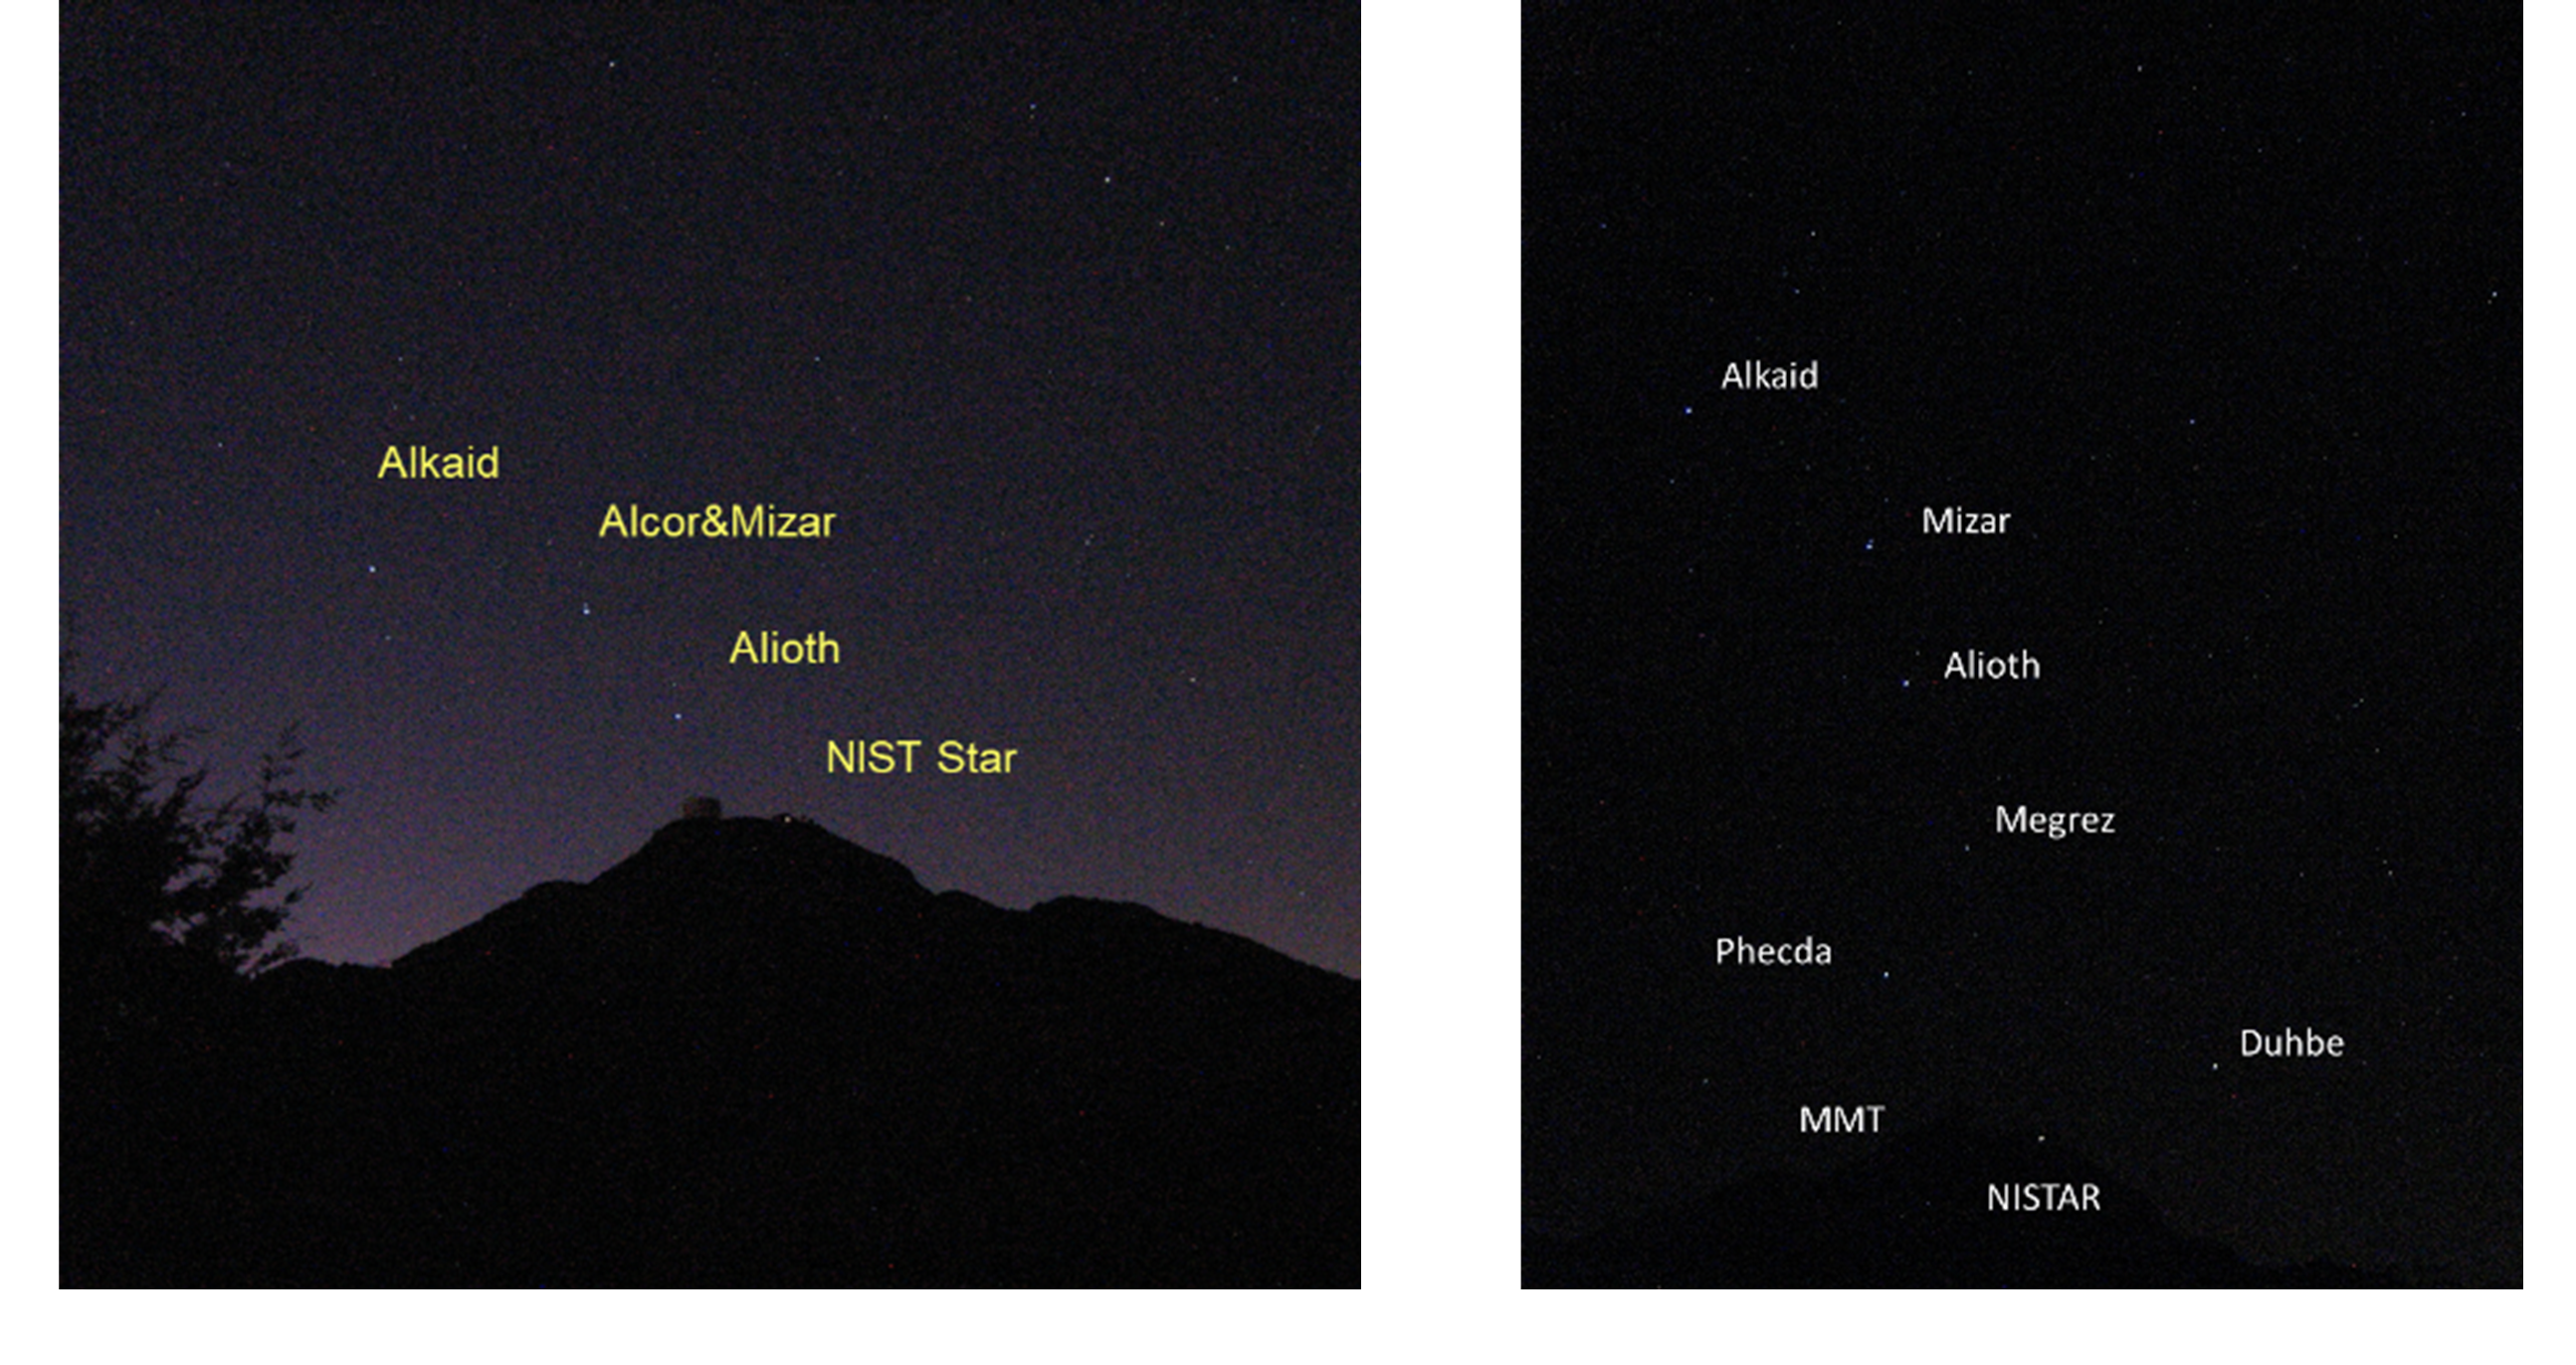 Side-by-side images of the night sky show stars of the Big Dipper and NISTAR labeled with their names.